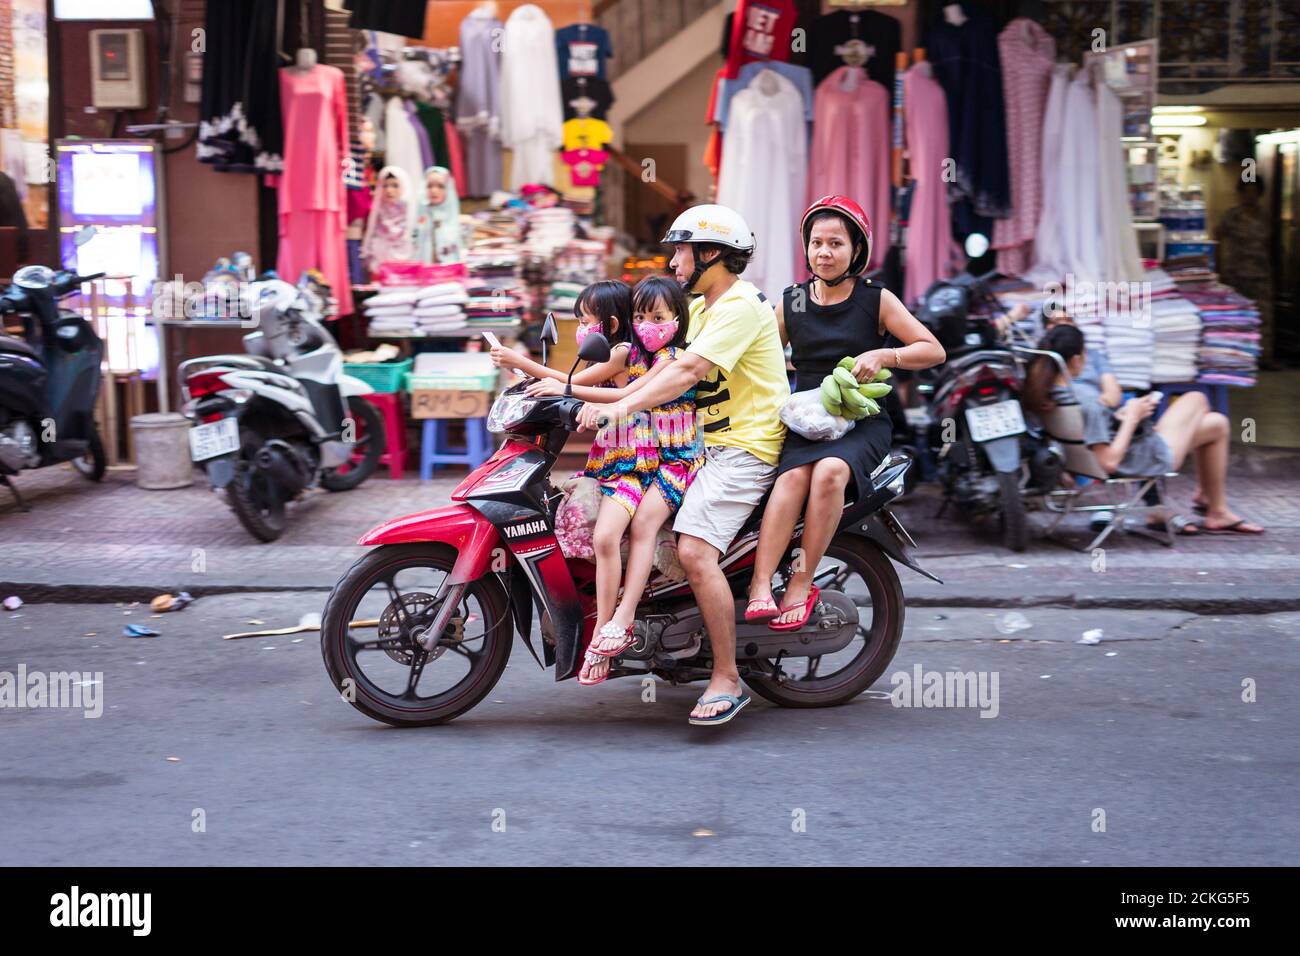 Ho Chi Minh / Vietnam - January 25, 2020: couple with two girls without helmets riding a motorcycle on the street in the capital Stock Photo